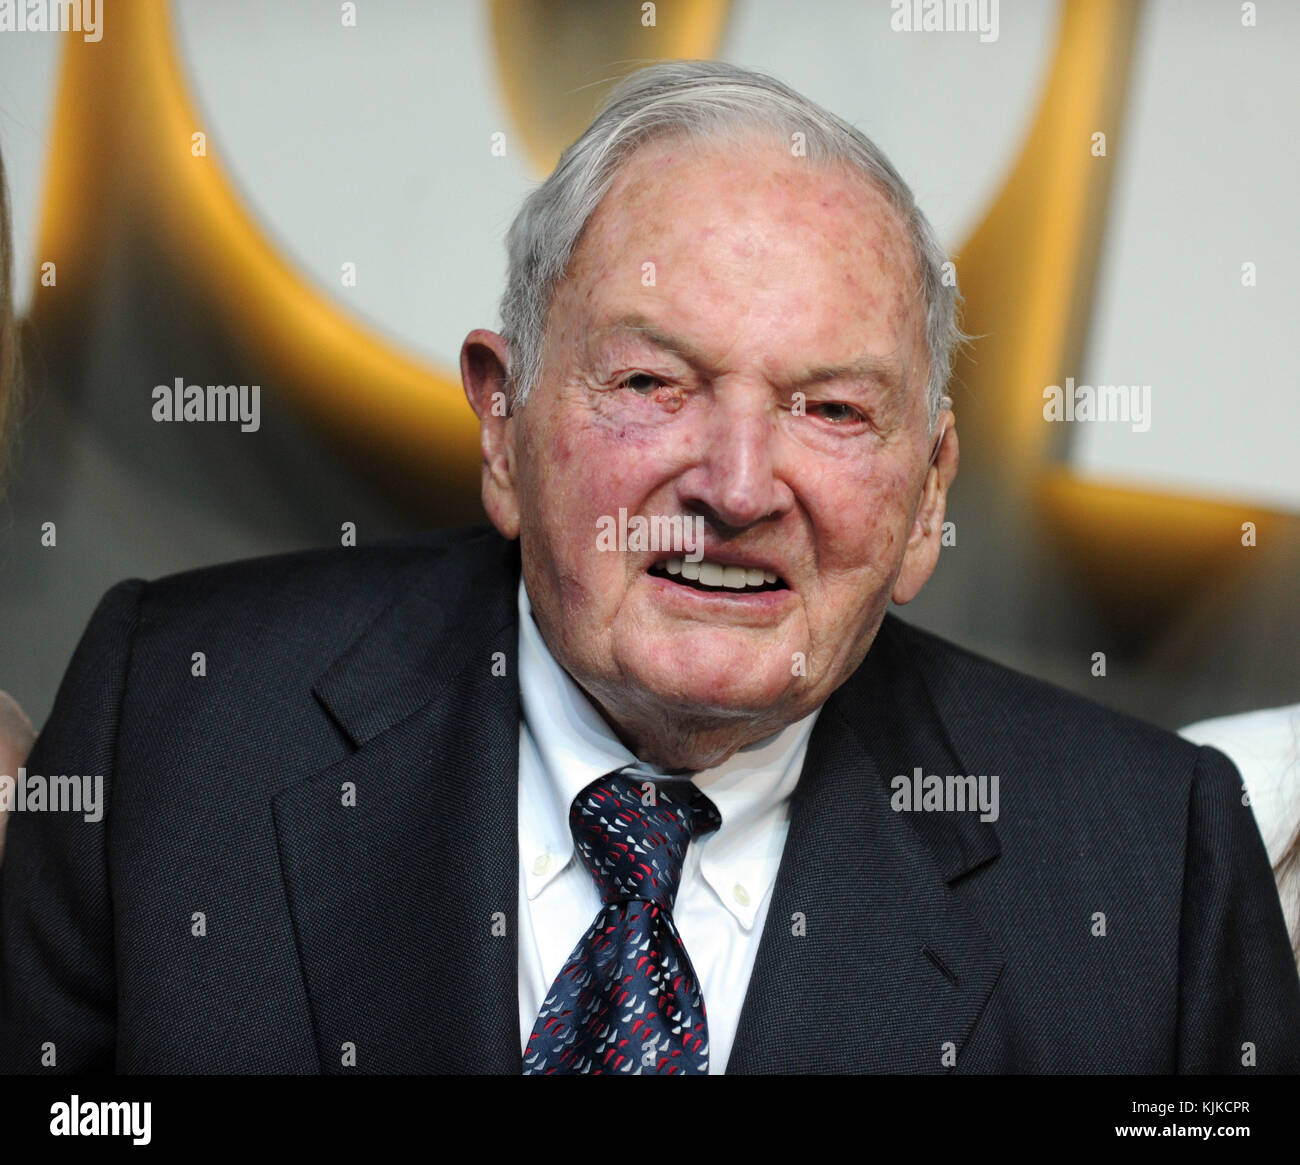 NEW YORK, NY - JUNE 01: David Rockefeller Sr. attends the 2016 Museum Of Modern Art Party In The Garden at Museum of Modern Art on June 1, 2016 in New York City.  People:  David Rockefeller Sr. Stock Photo